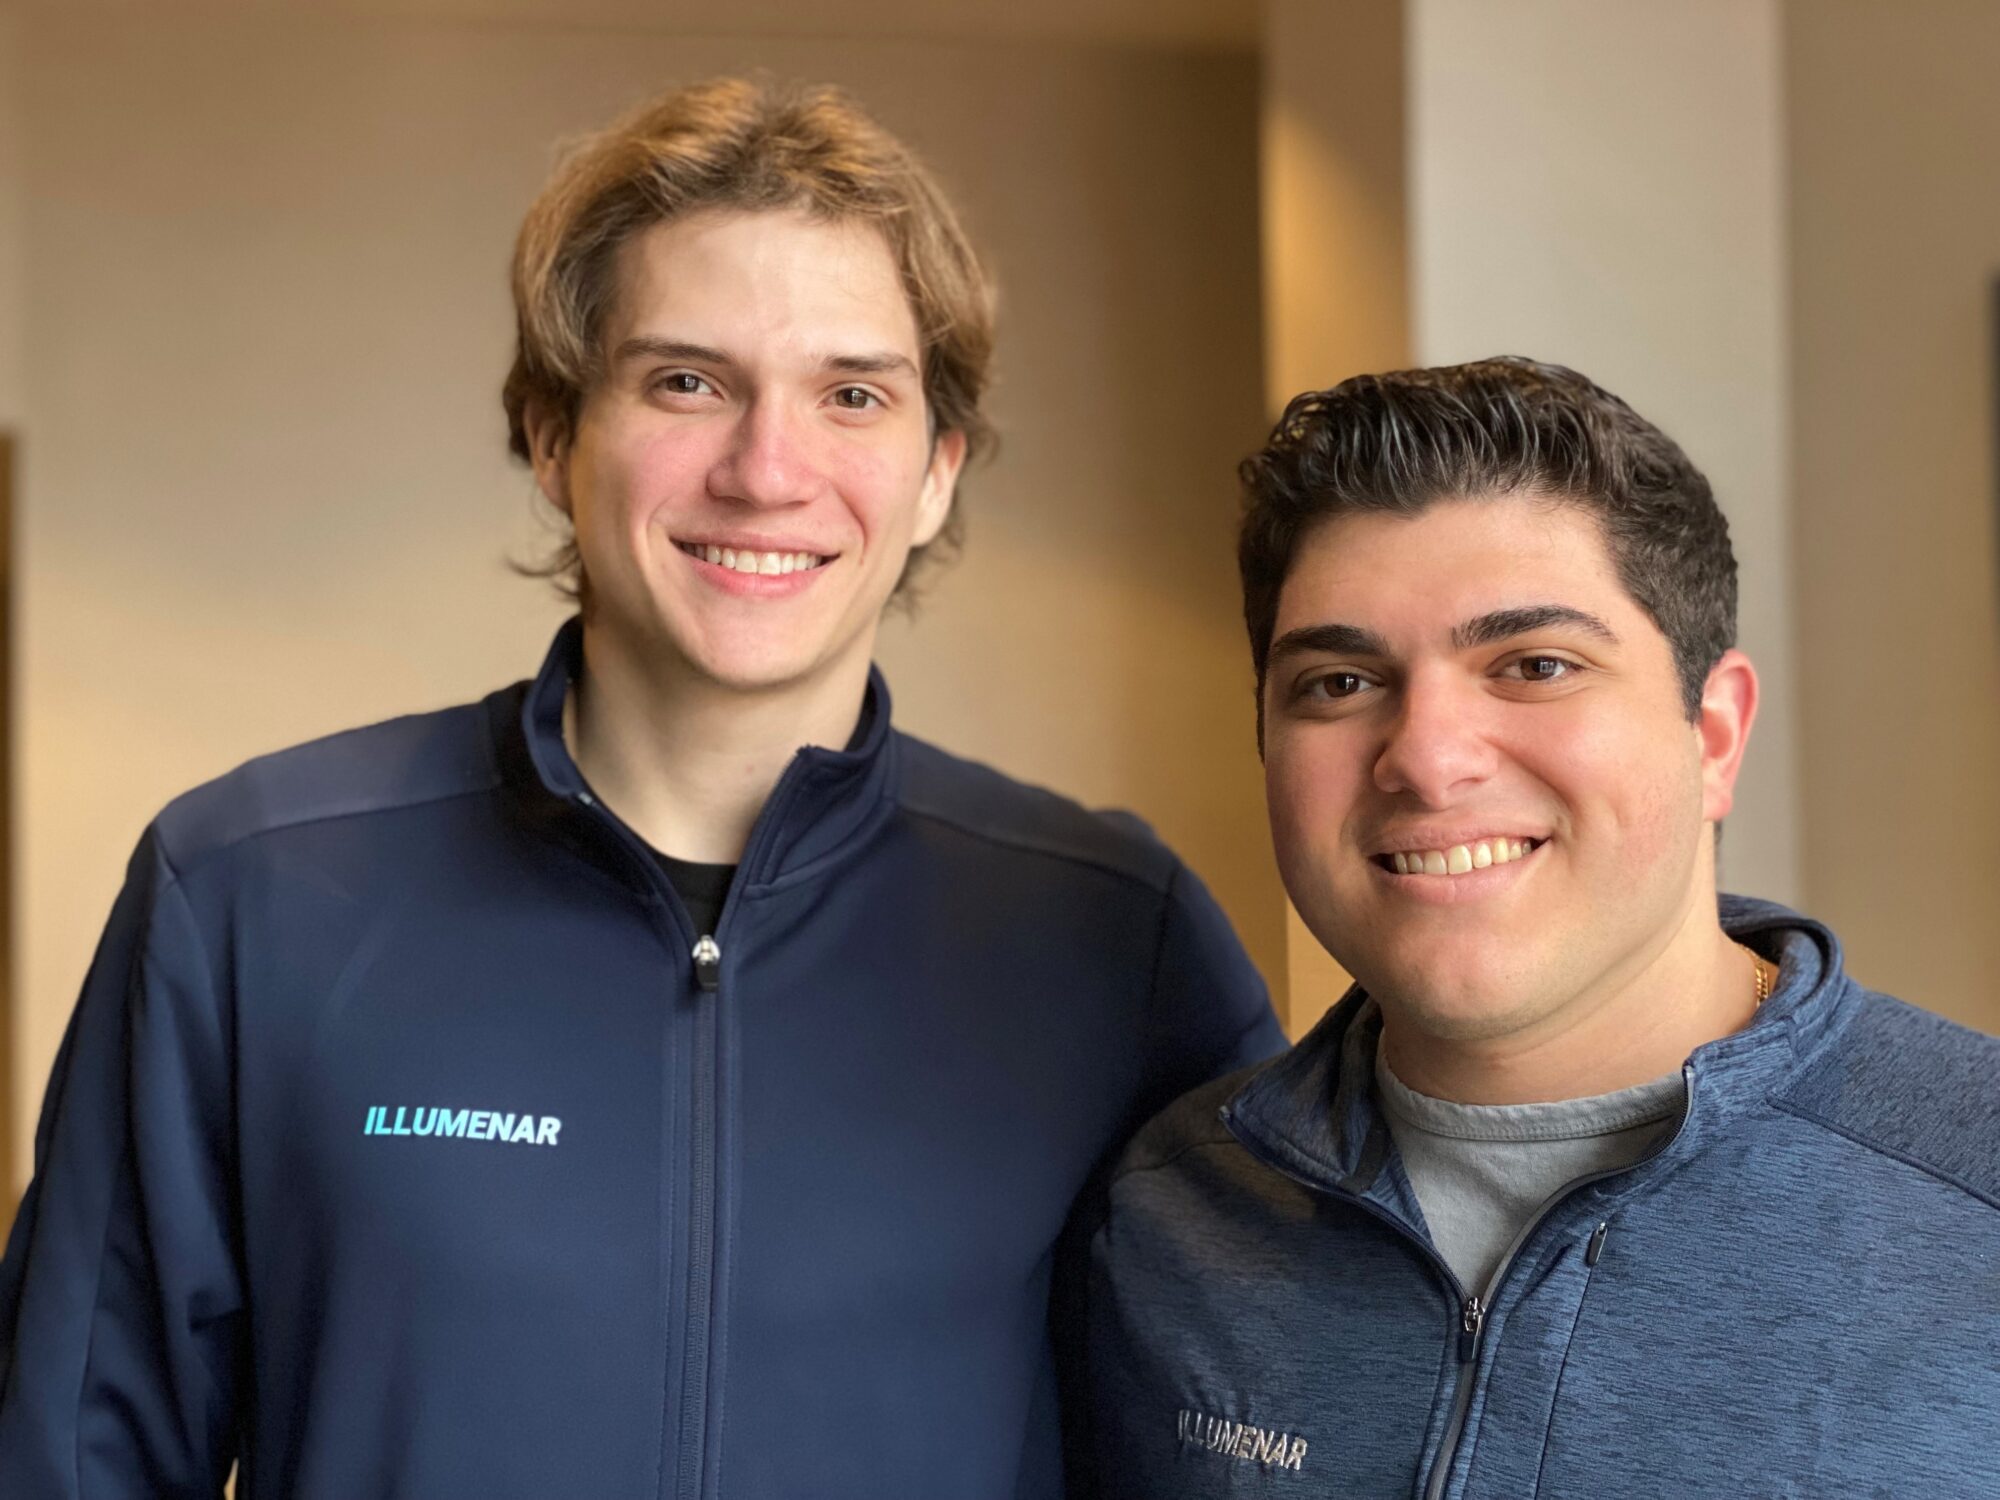 headshot of two student founders in company apparel